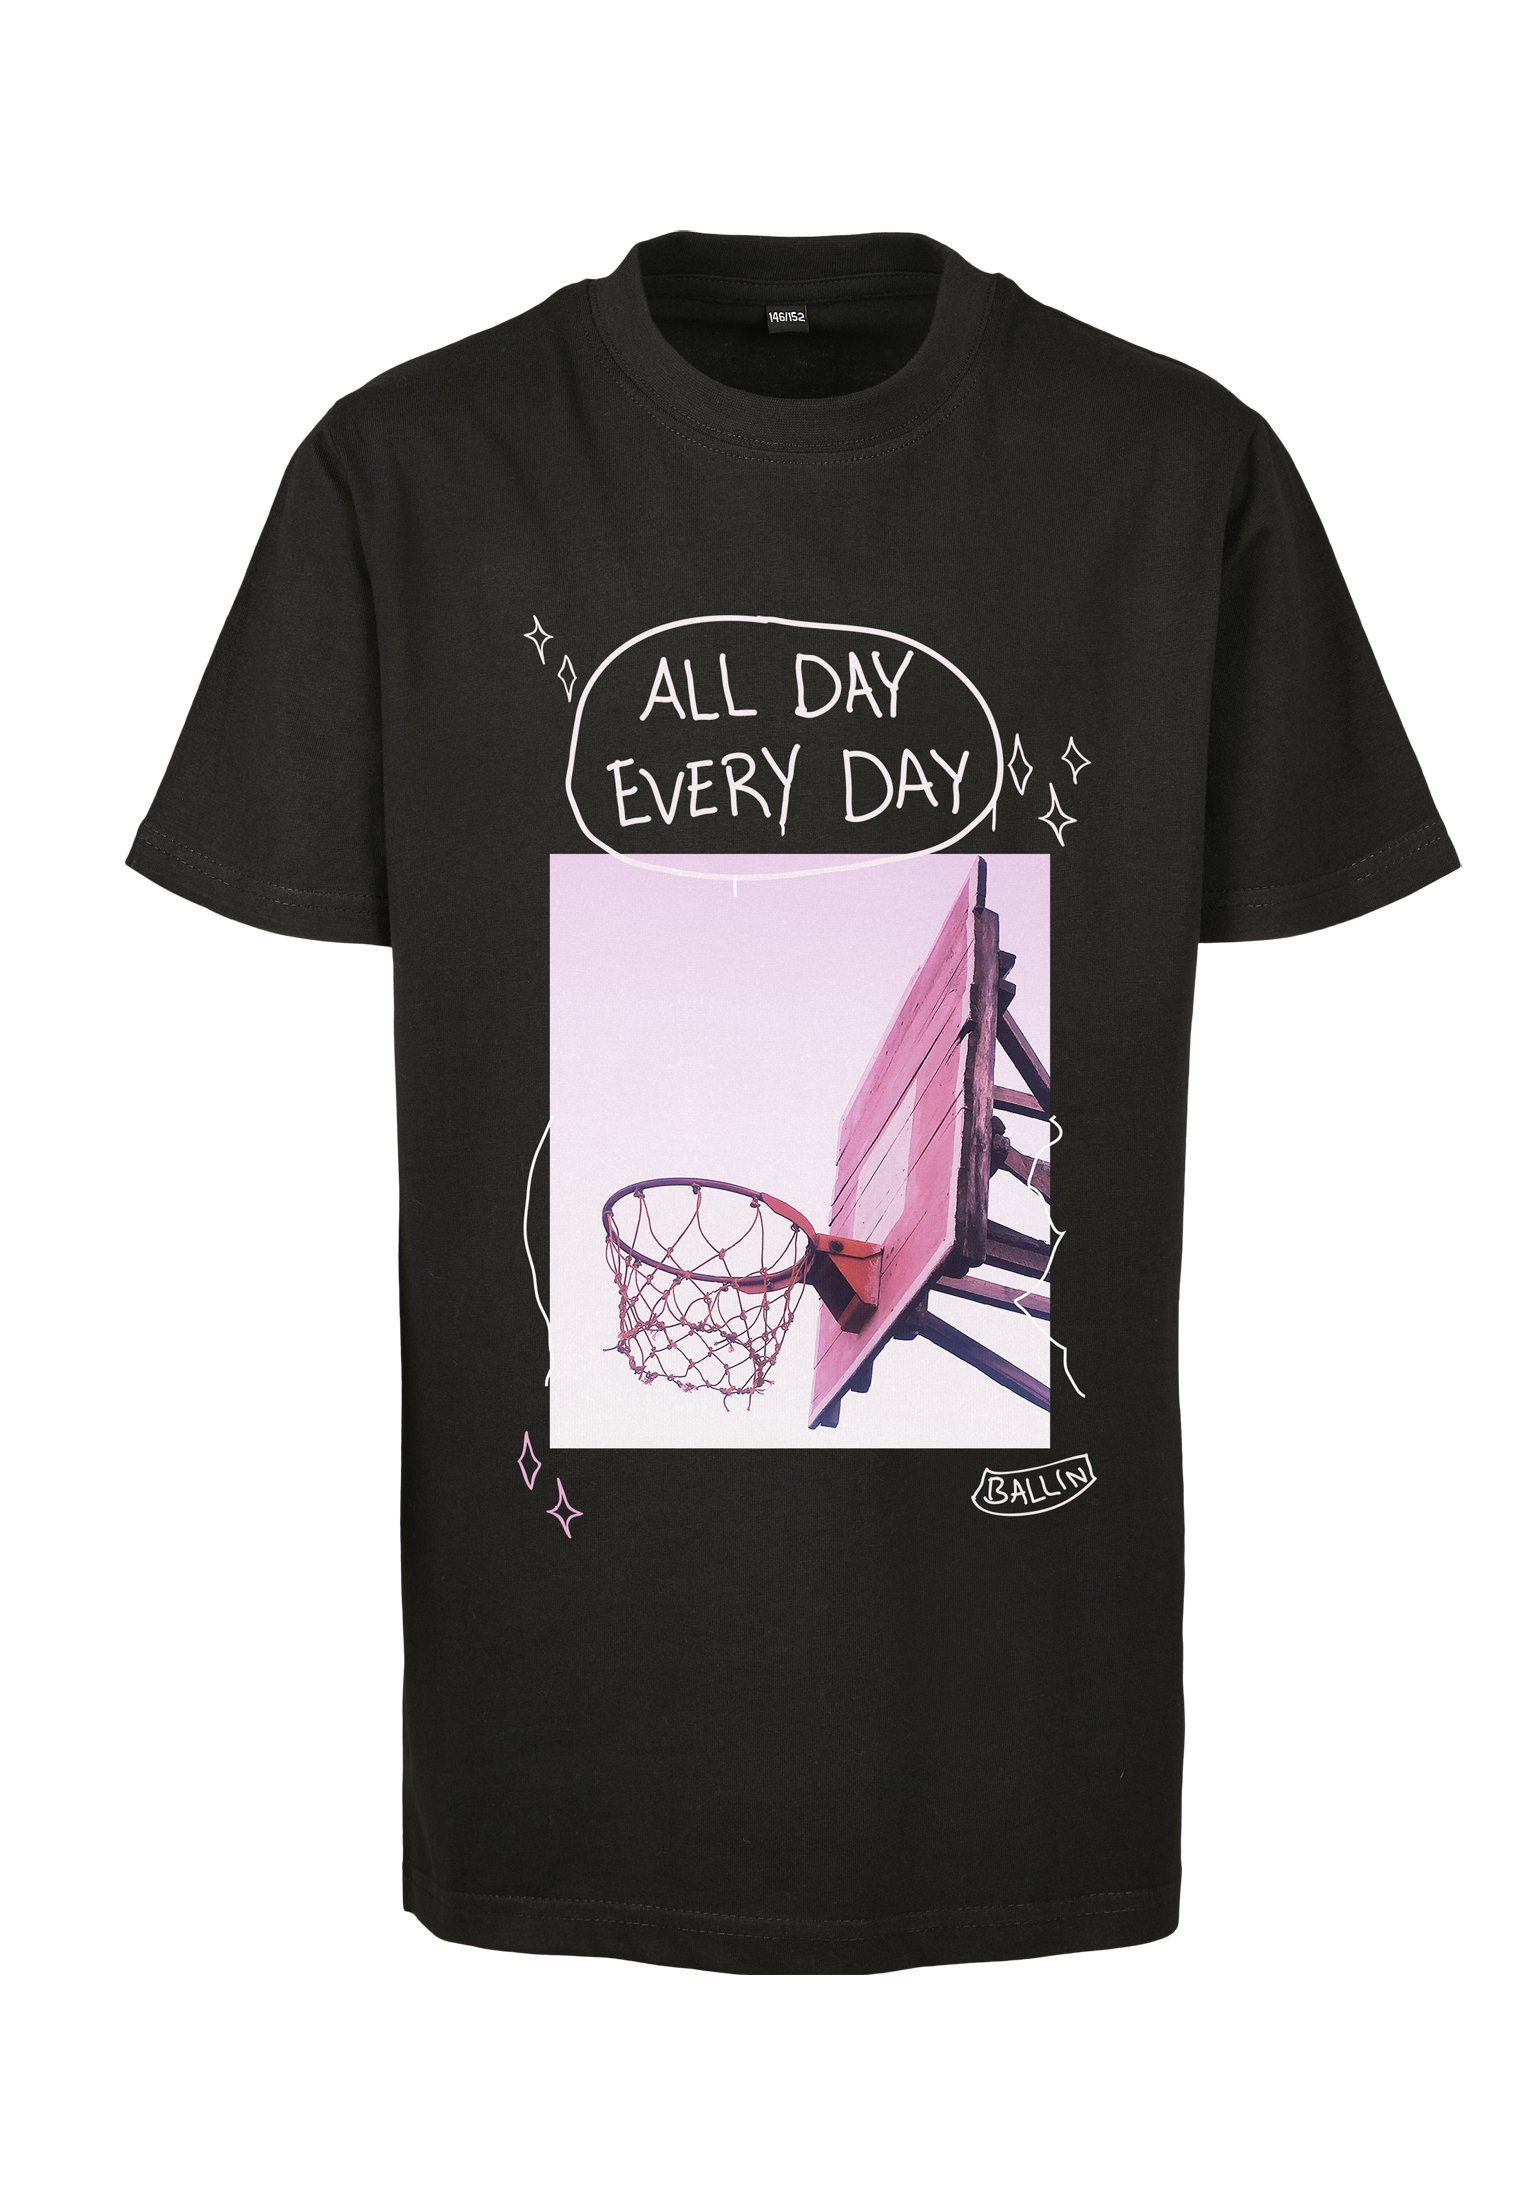 Tee Kids Every T-Shirt Day MisterTee All (1-tlg) Day Pink Kinder